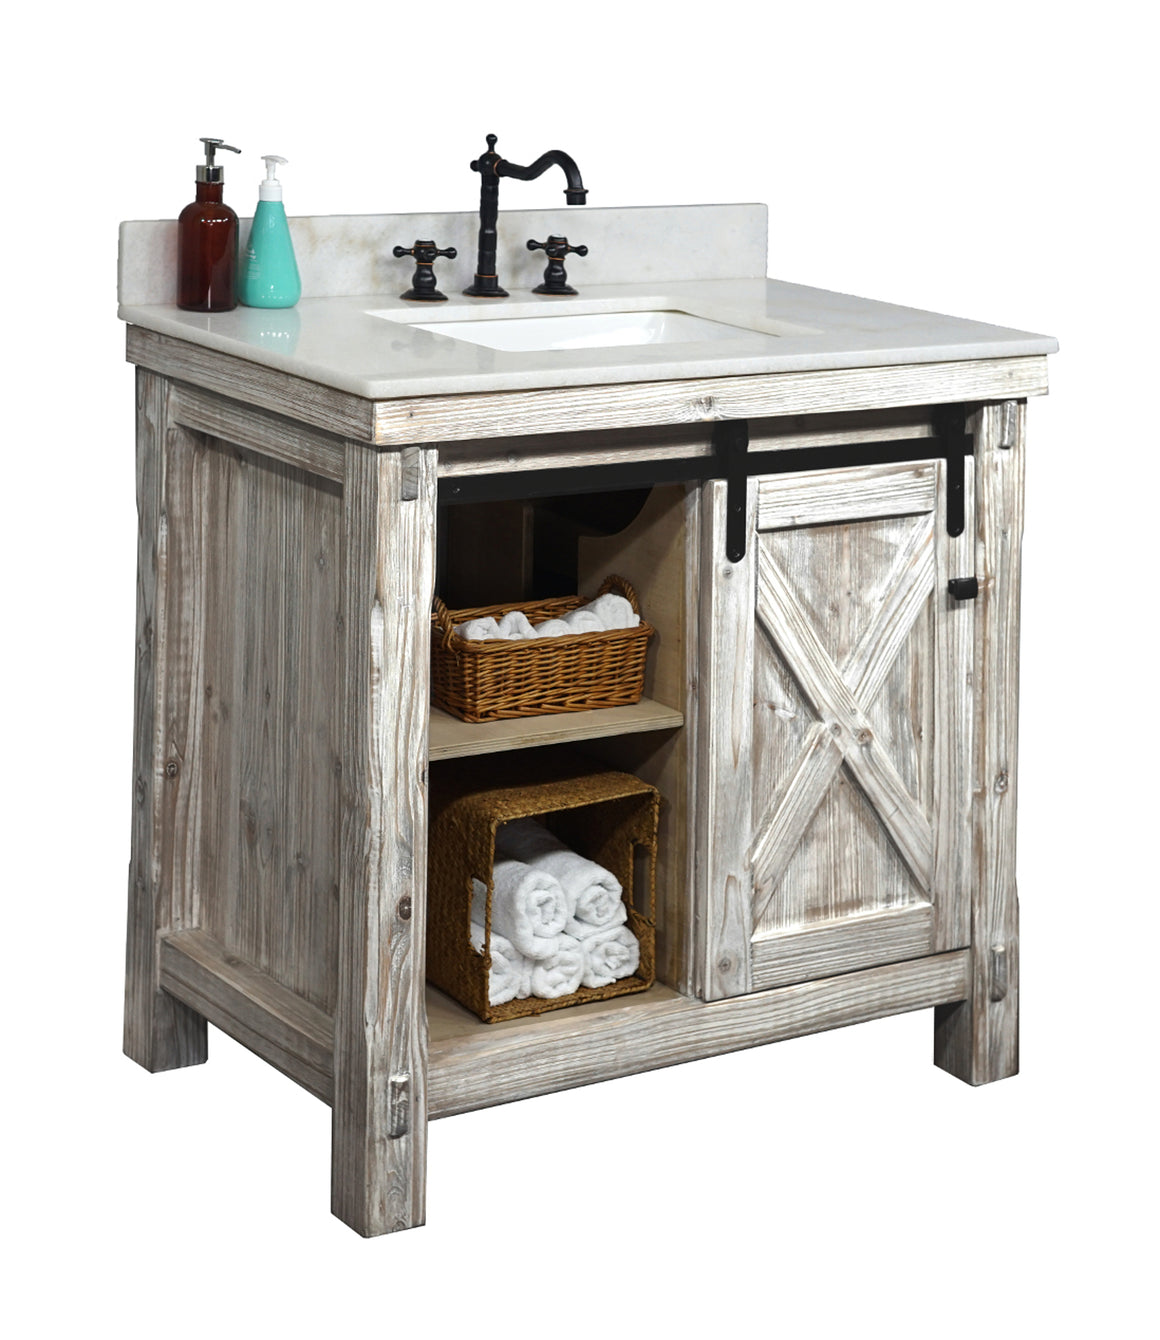 36"RUSTIC SOLID FIR BARN DOOR STYLE SINGLE SINK VANITY IN WHITE WASH WITH ARCTIC PEARL  QUARTZ MARBLE TOP-NO FAUCET